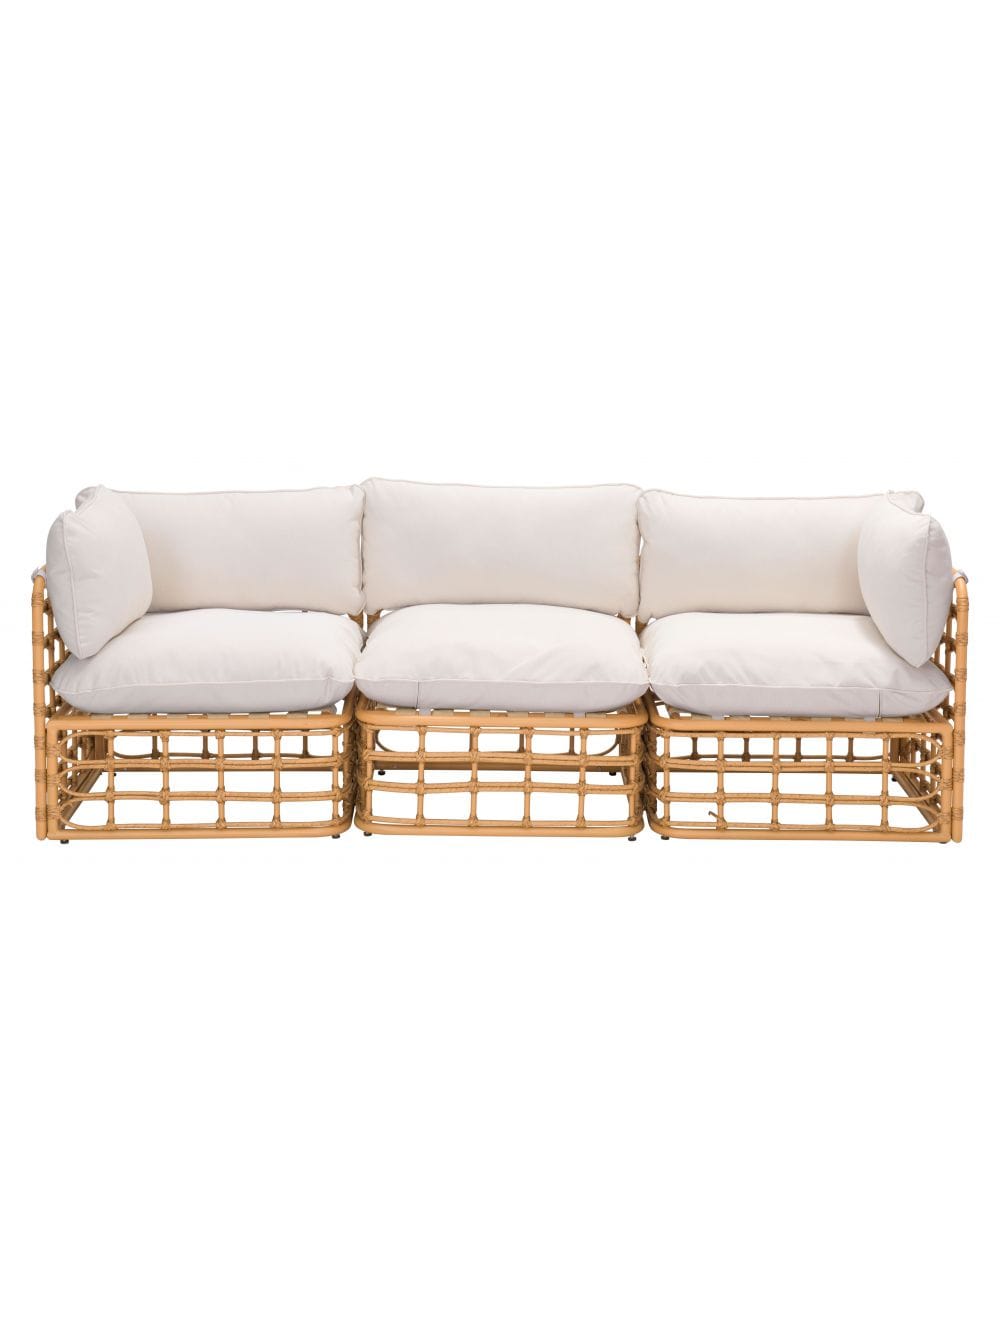 ZOU Outdoor Living Seating ZOU - Kapalua Middle Chair Beige & Natural | 703958